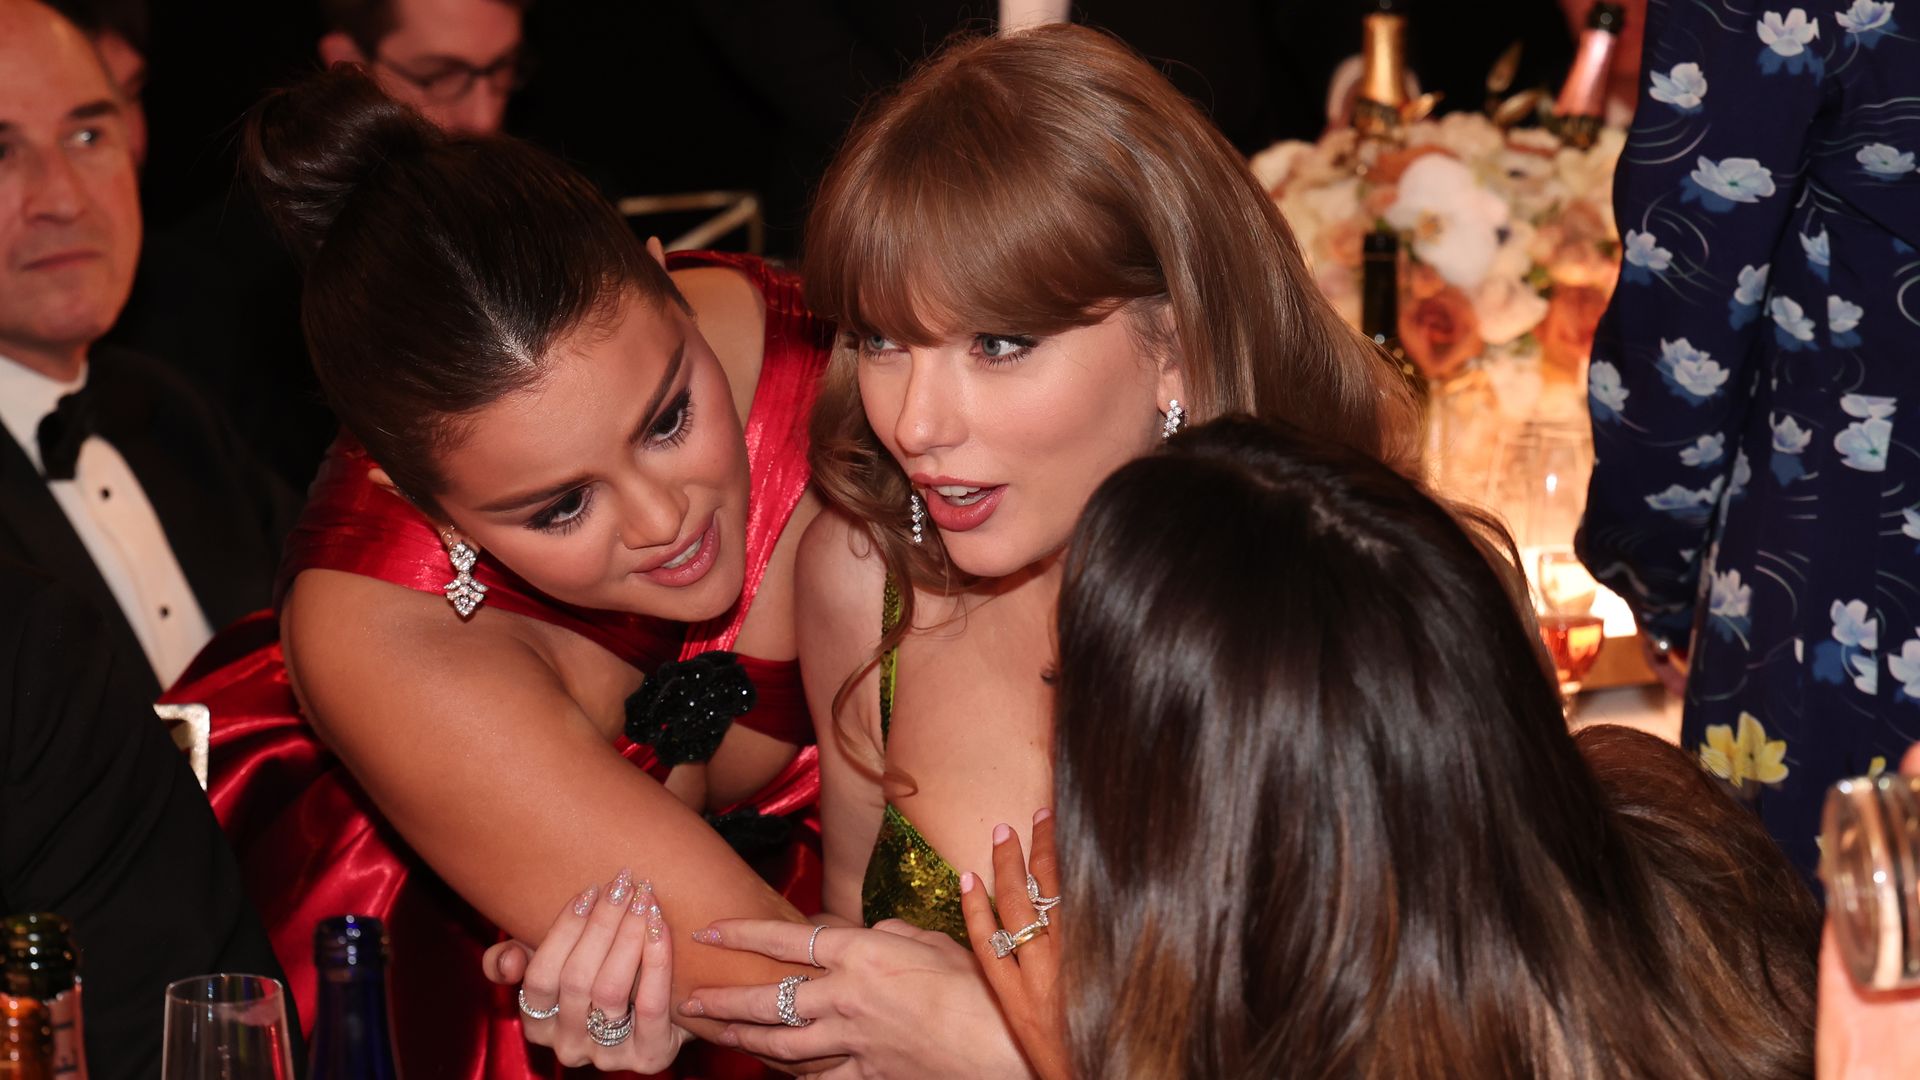 Selena Gomez and Taylor Swift at the 81st Golden Globe Awards 